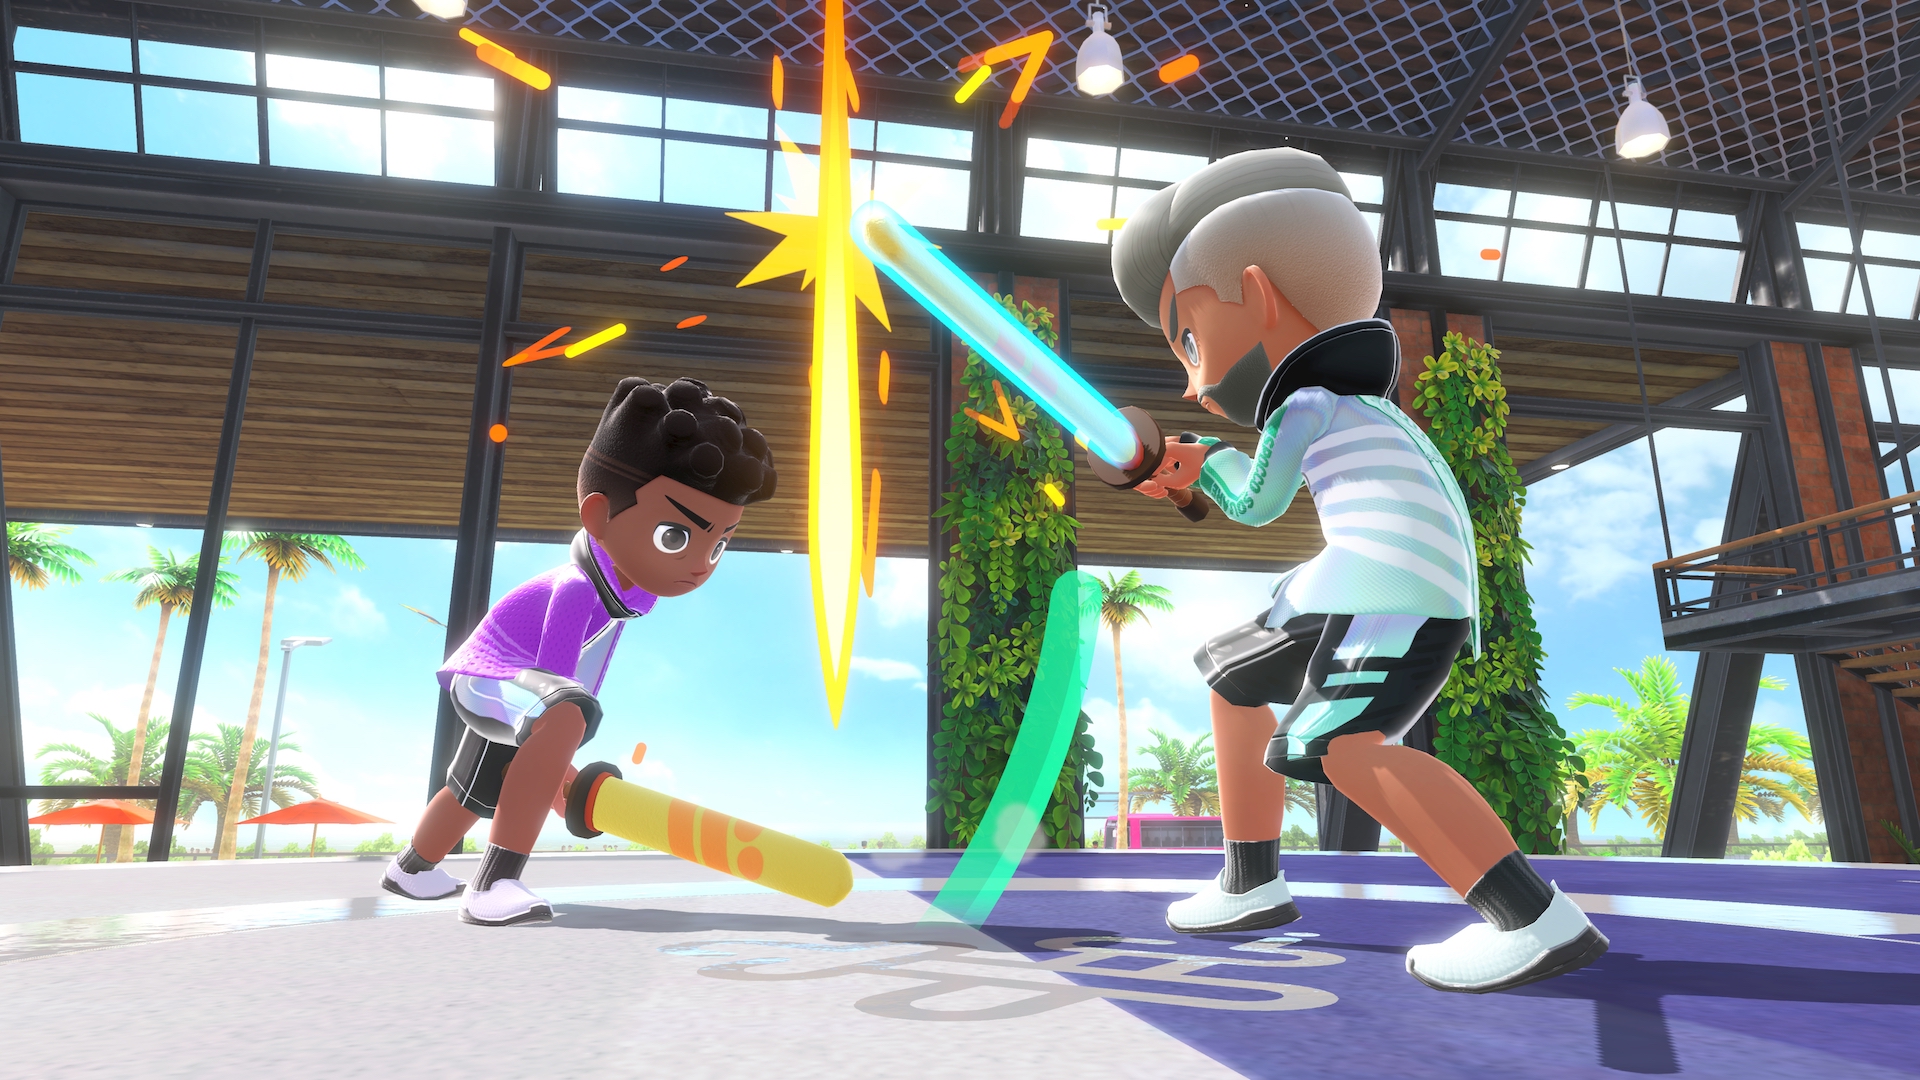 Two players battle with foam swords in chambara, in a screenshot from Nintendo Switch Sports